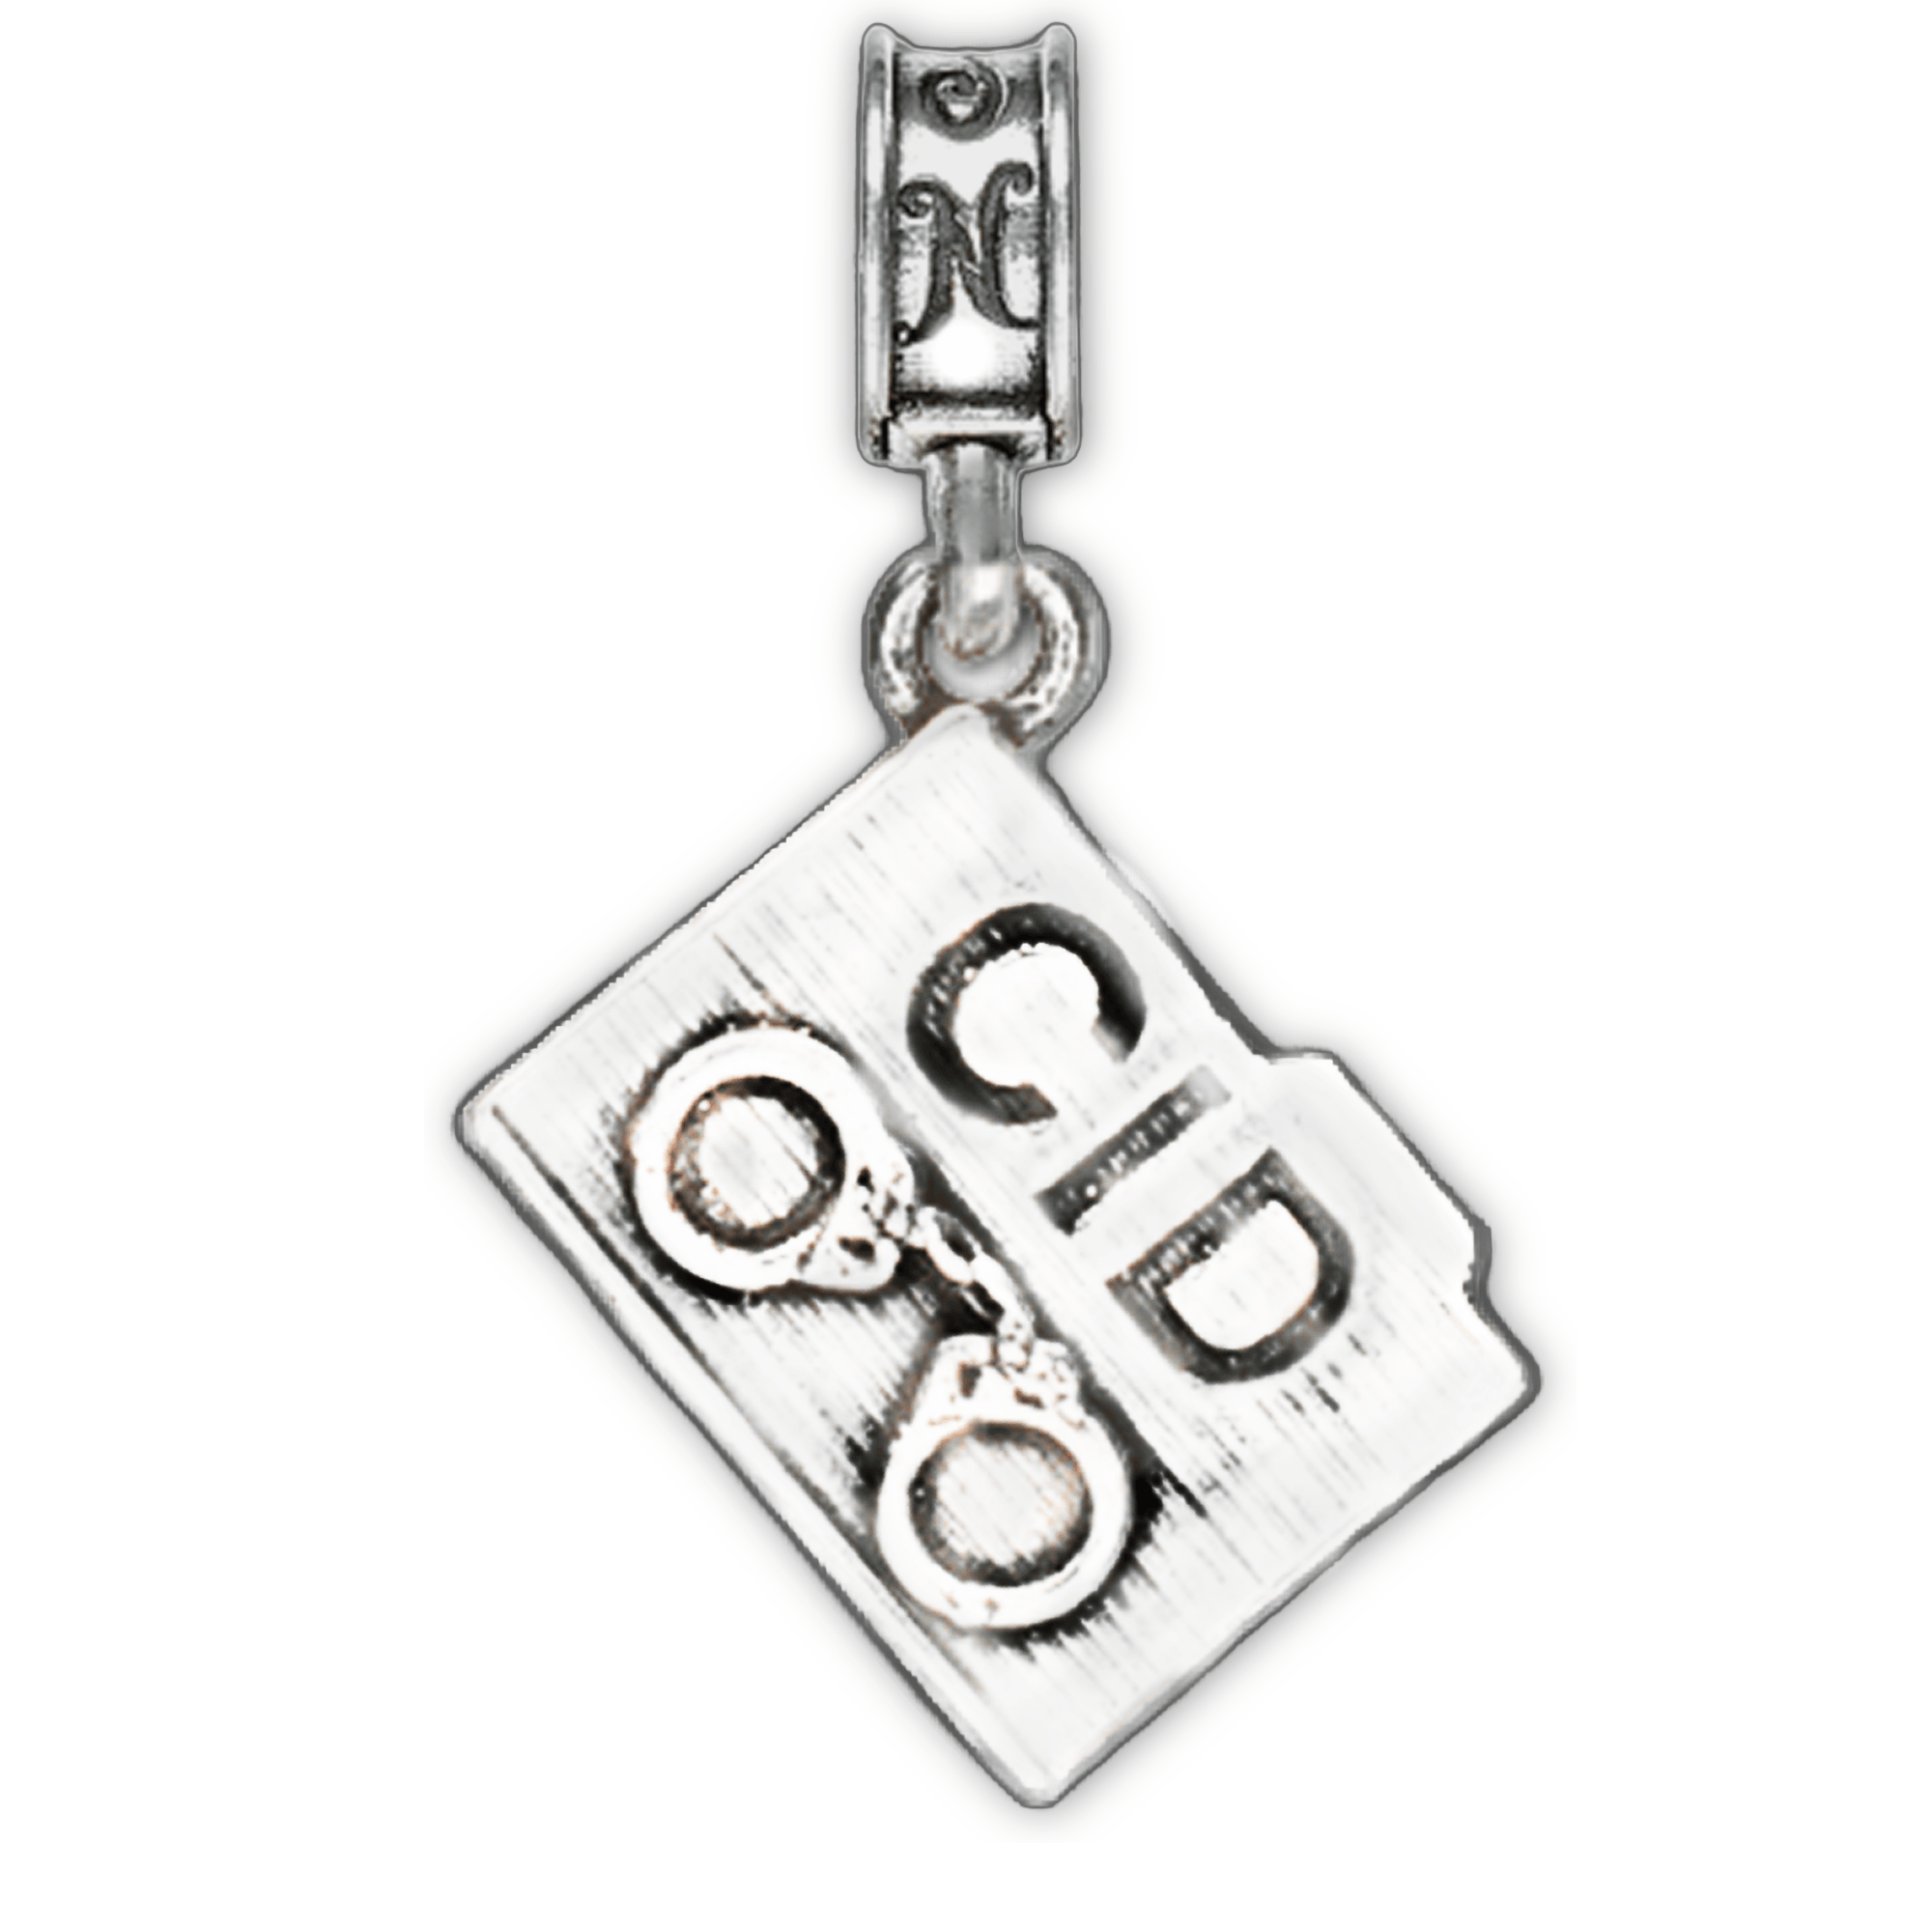 Military Jewelry, Military Charms, United States Army, Military Gifts, CID Charm